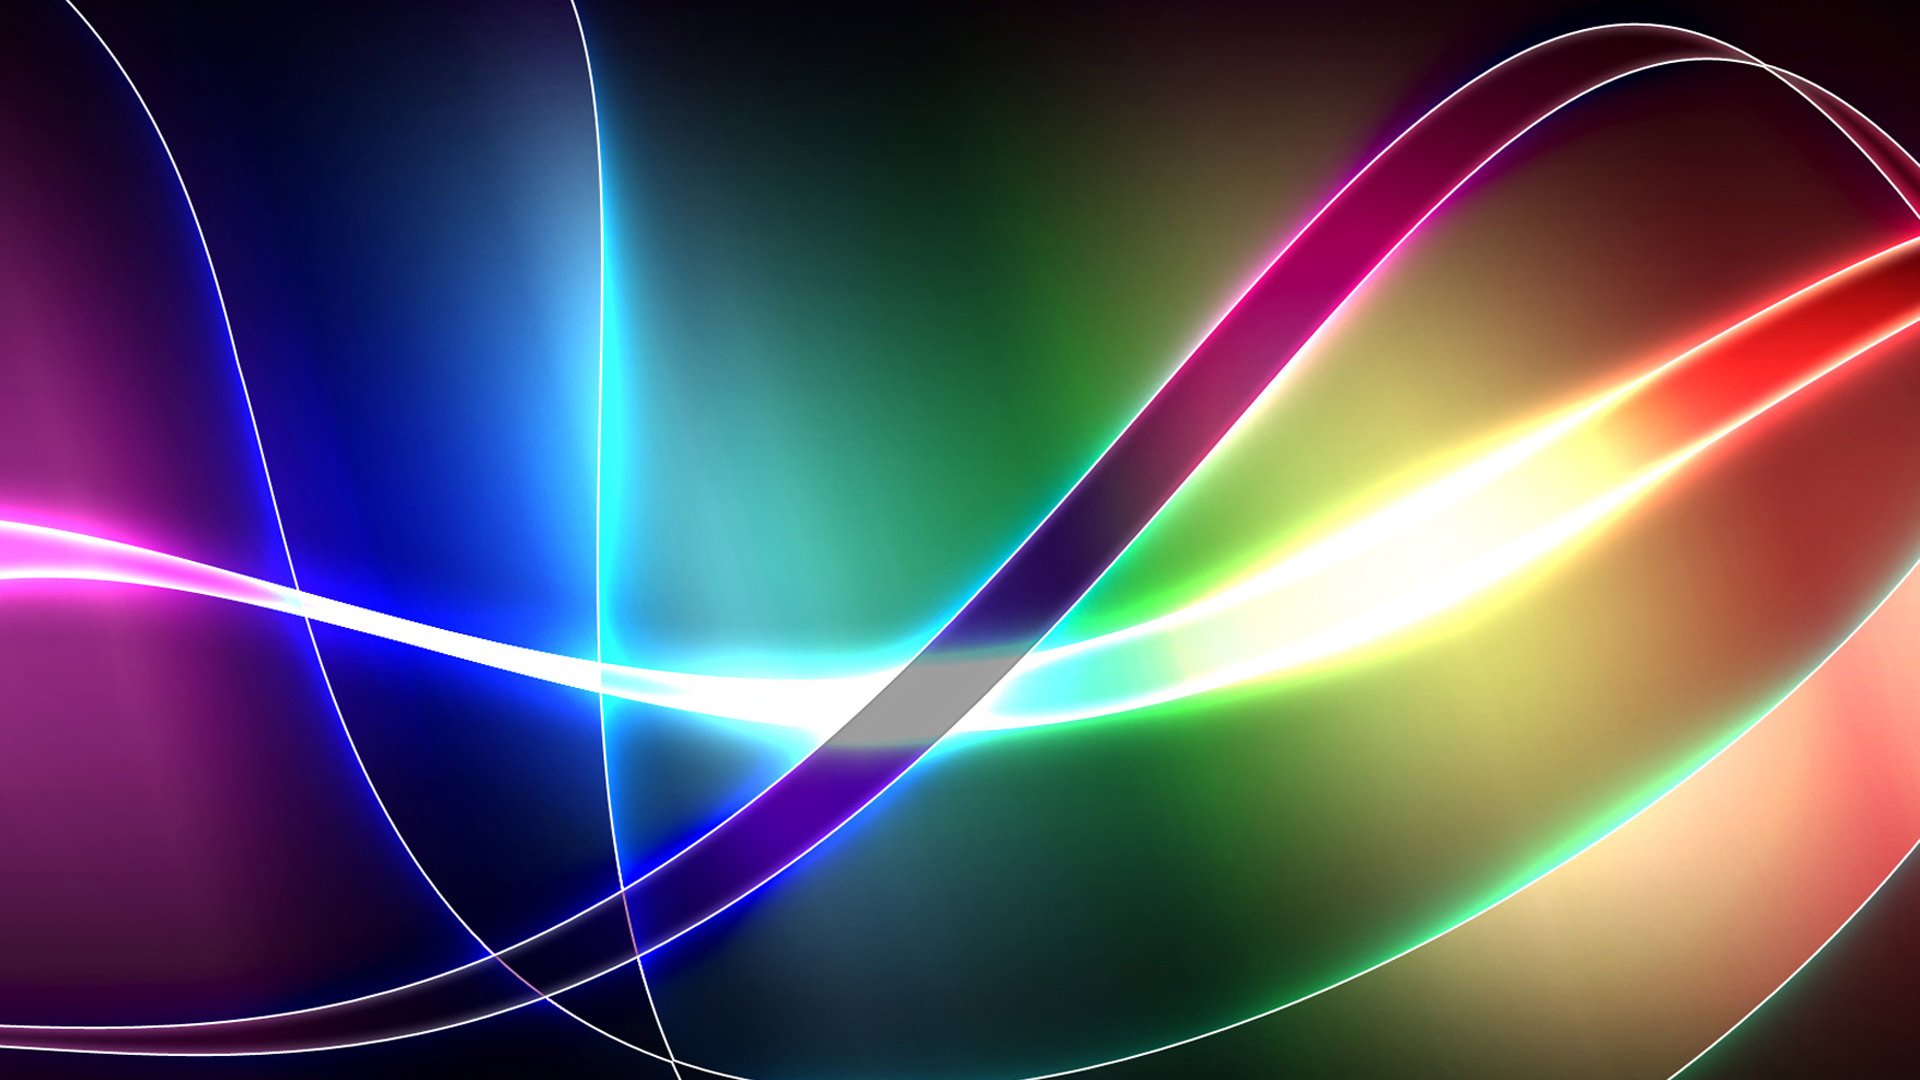 Colorful Abstract Backgrounds 3217 Hd Wallpapers in Abstract 1920x1080